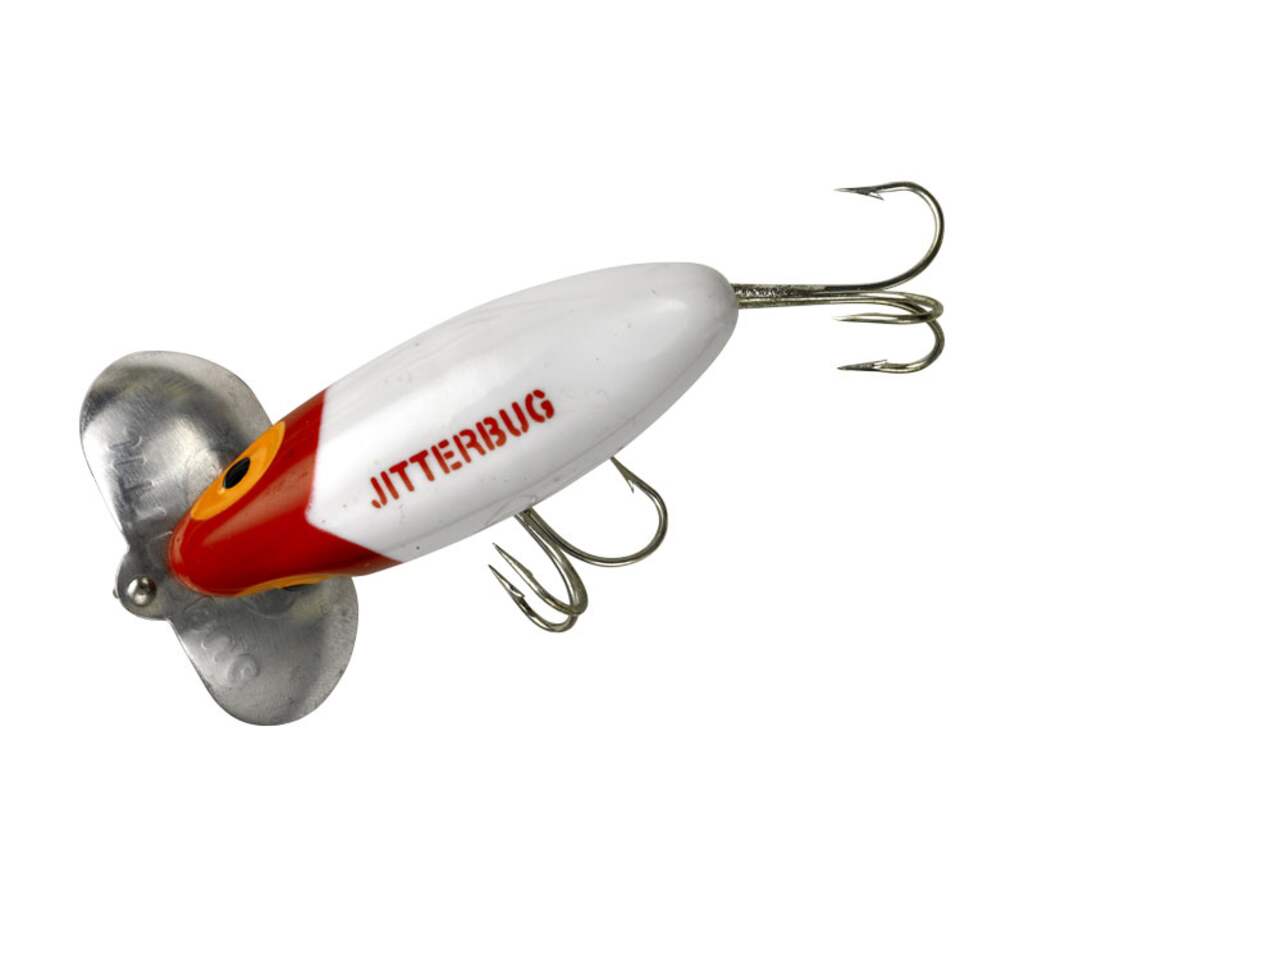 Pike Fishing Lures Set With Frog, Crankbait, Insect Hooks, And